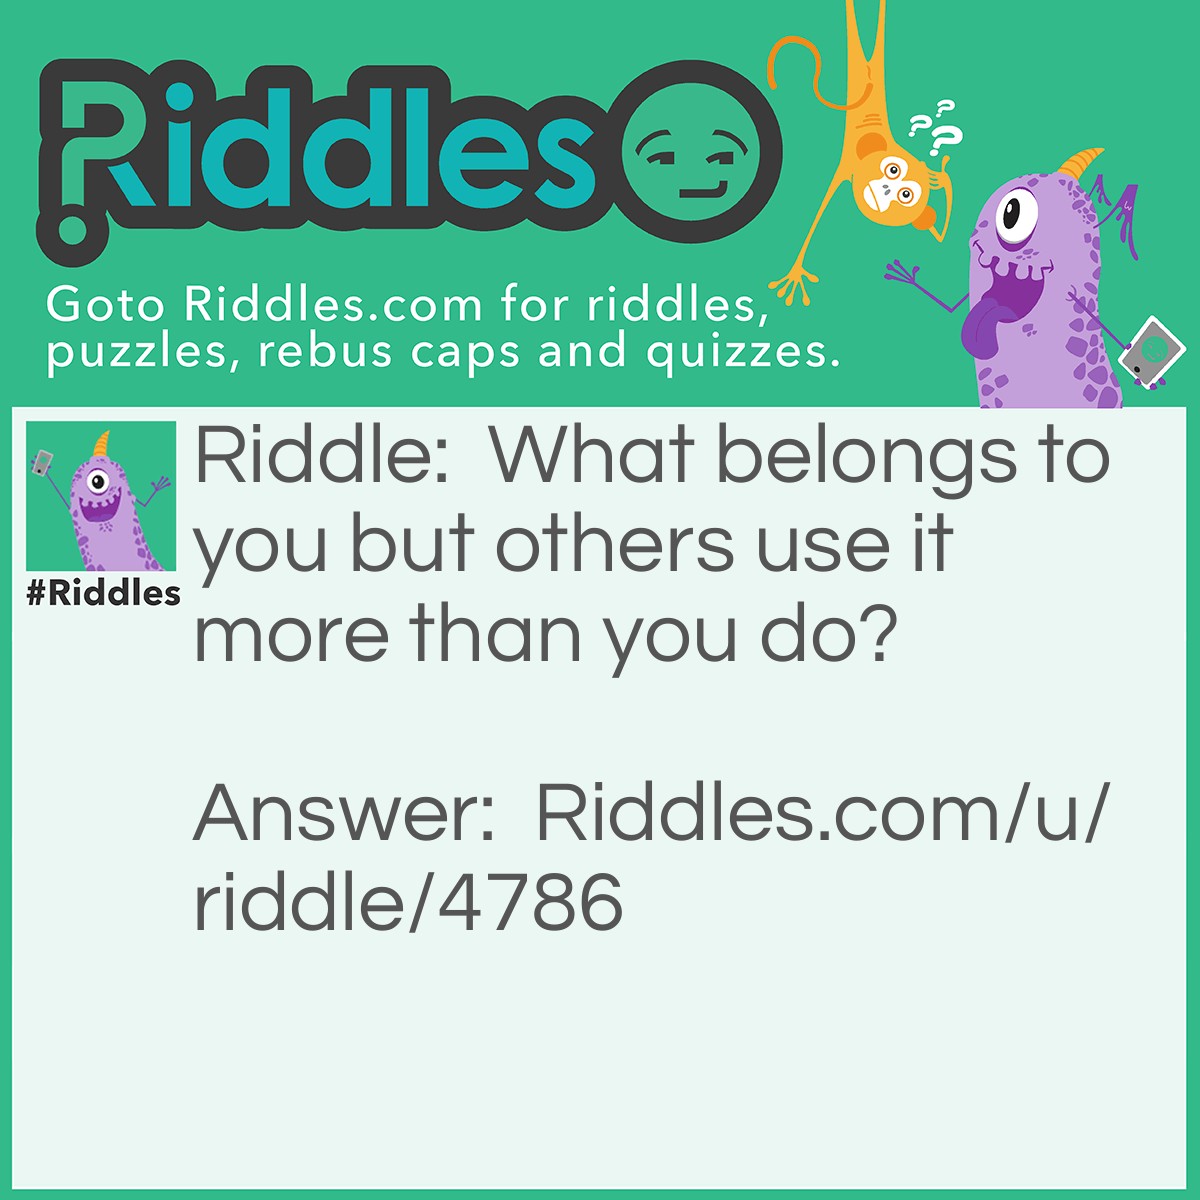 Riddle: What belongs to you but others use it more than you do? Answer: your name